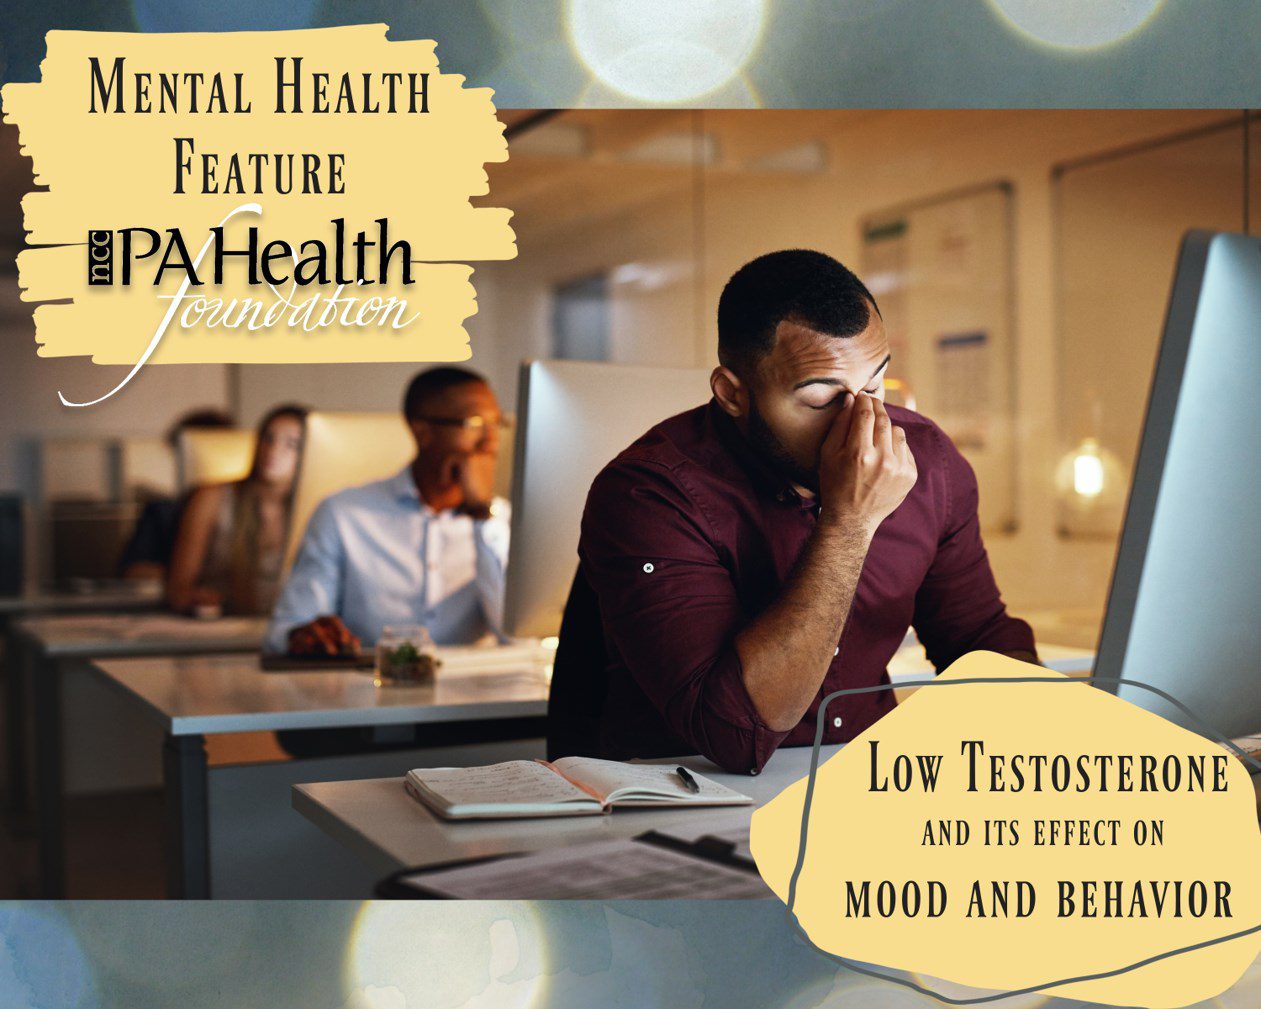 Low Testosterone and its Effect on Mood and Behavior